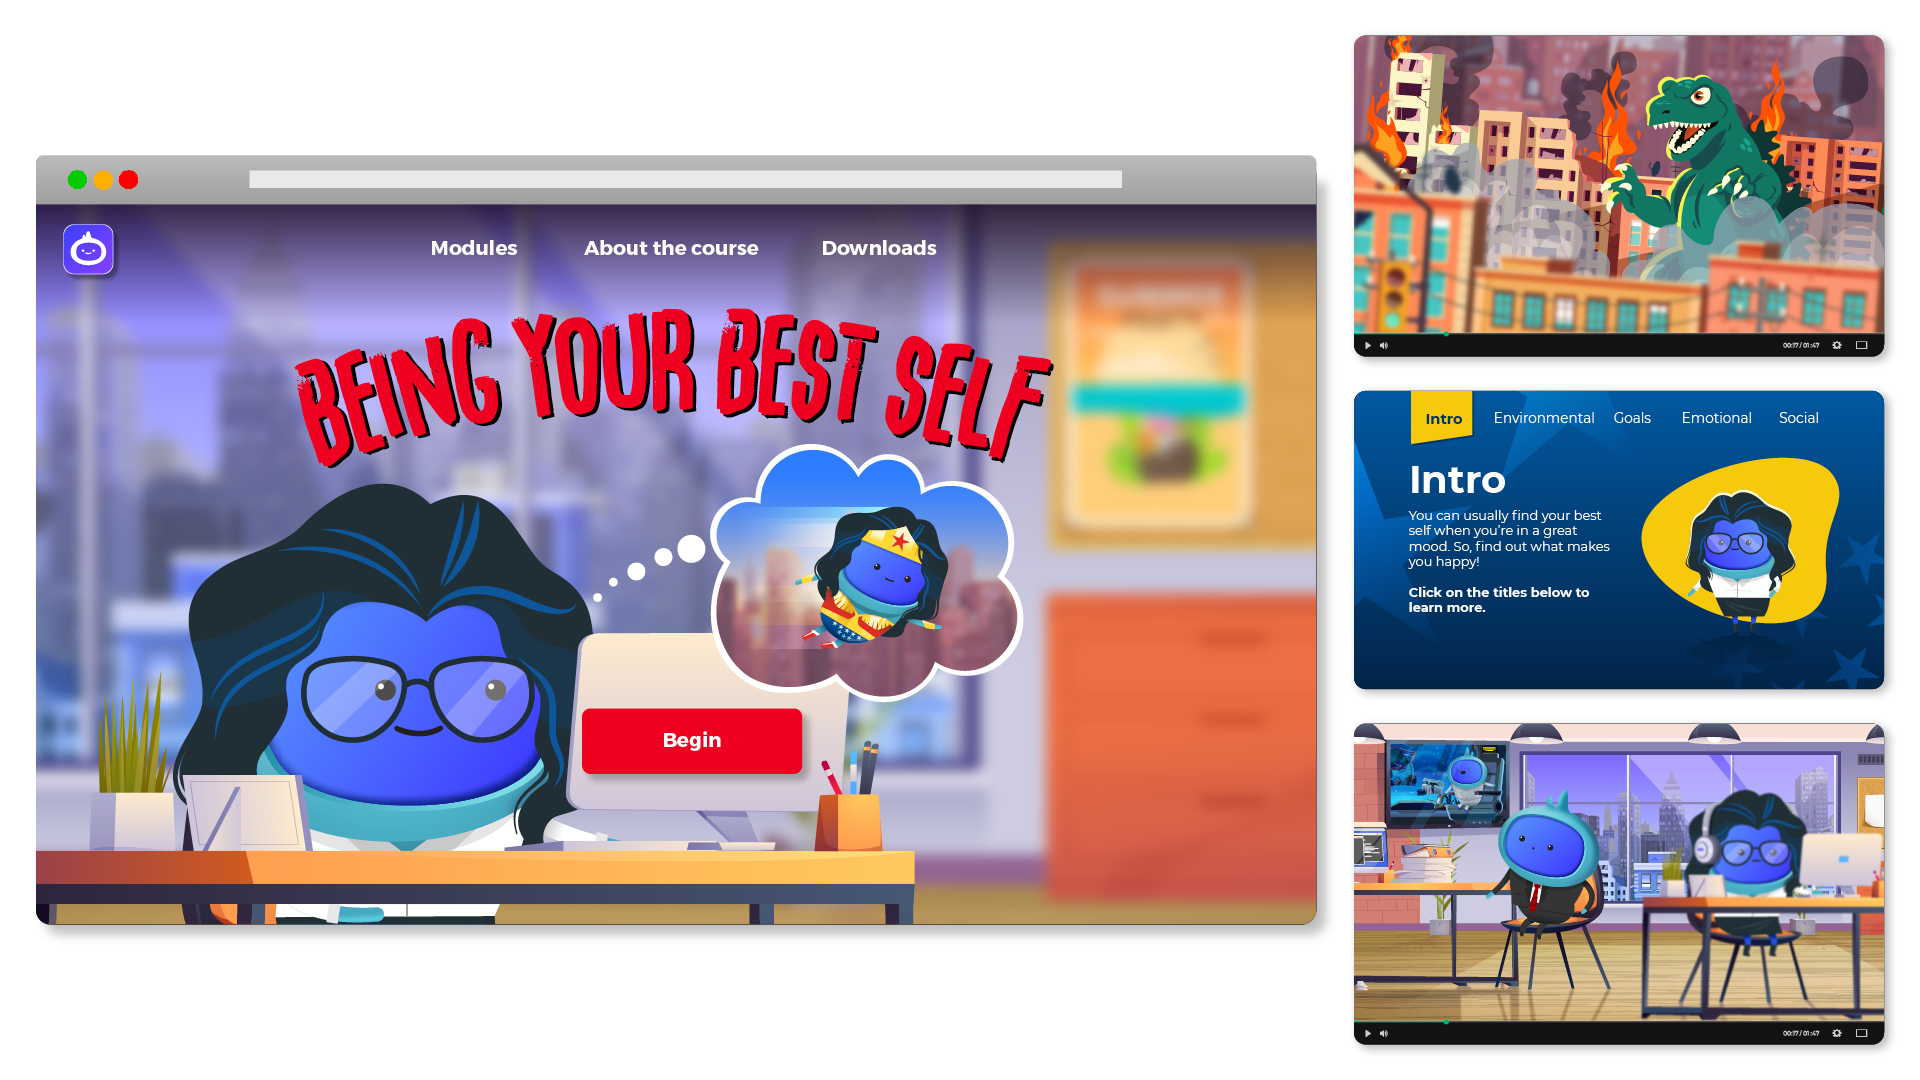 iAM00227 - Being your Best Self - Landing Page Artwork Template